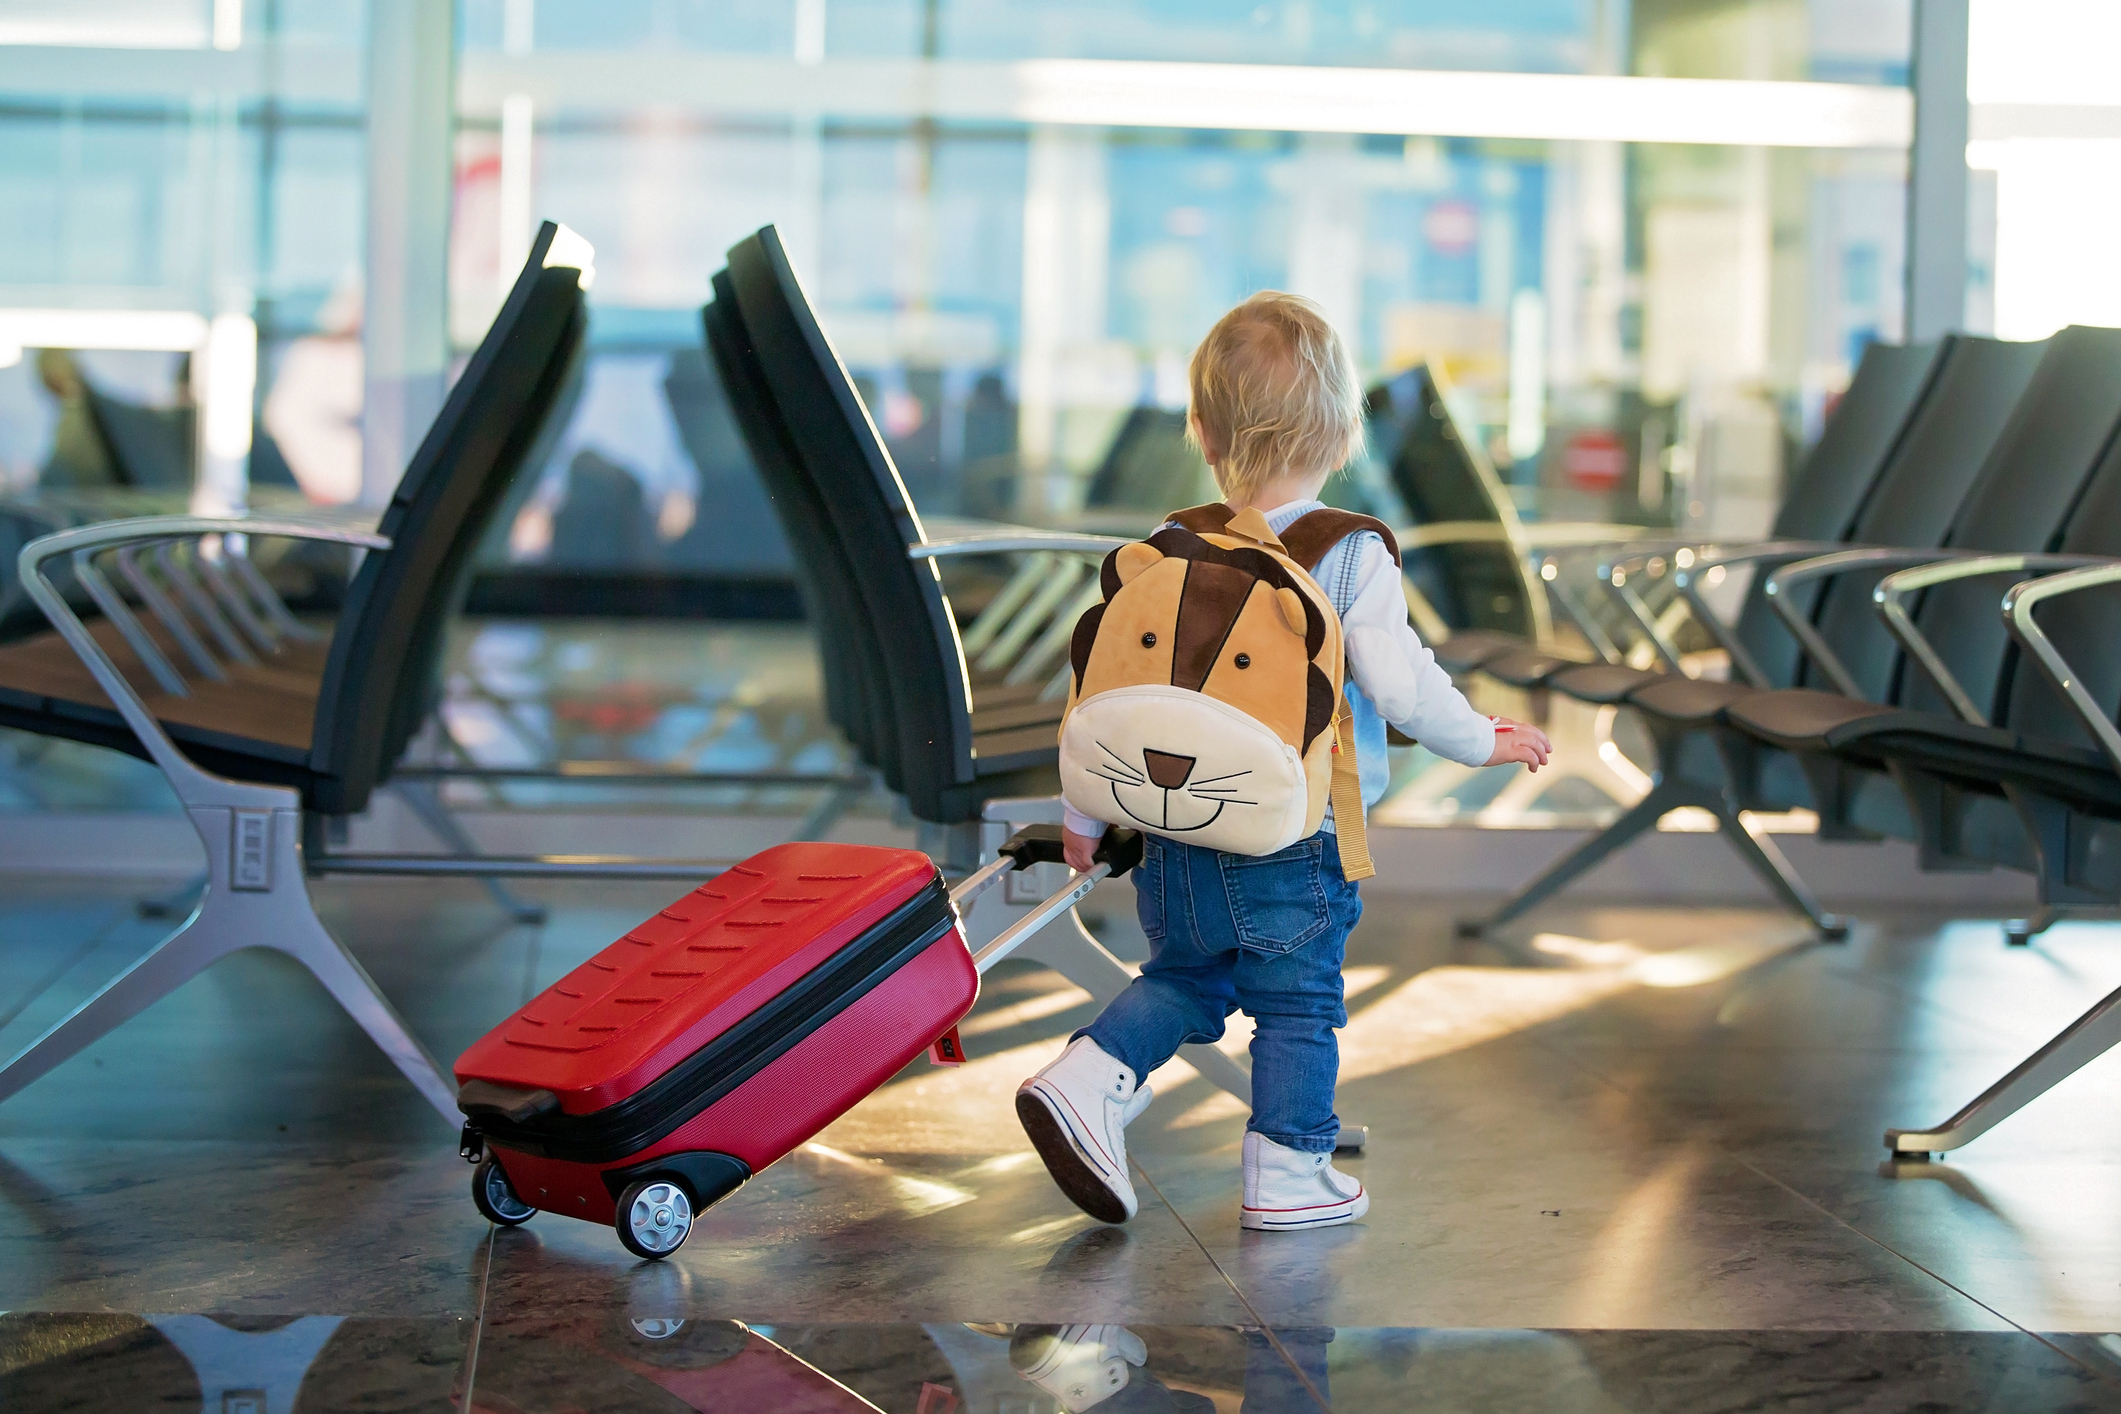 Child with animal backpack pulling a suitcase in an airport waiting area